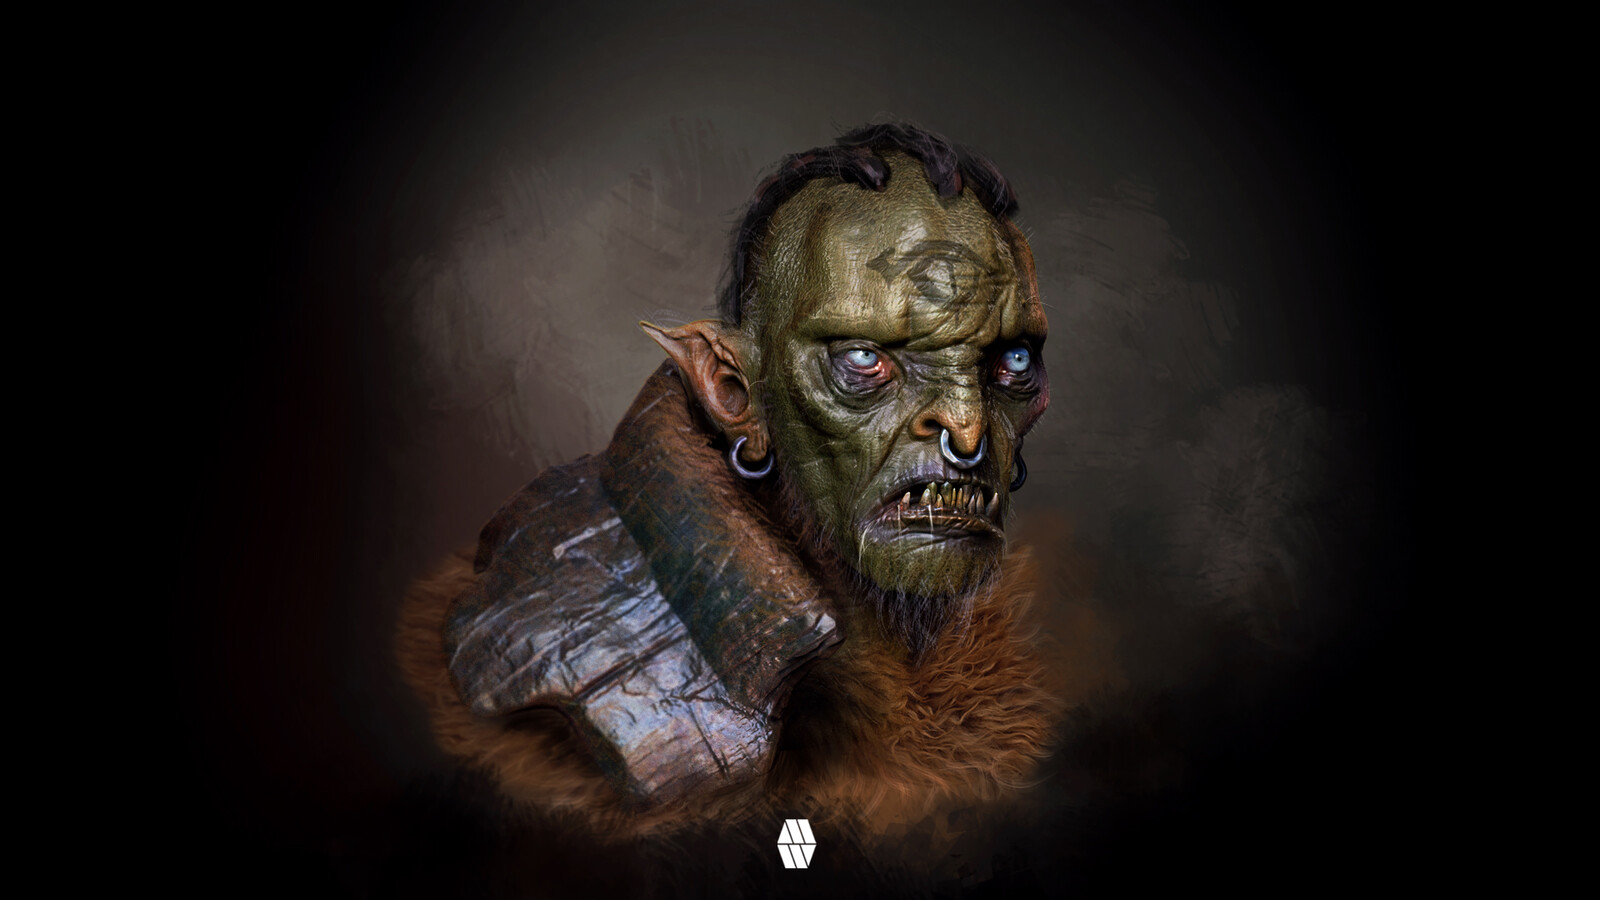 Orc Bust Concept - Personal Project 'Orcs of Middle Earth'